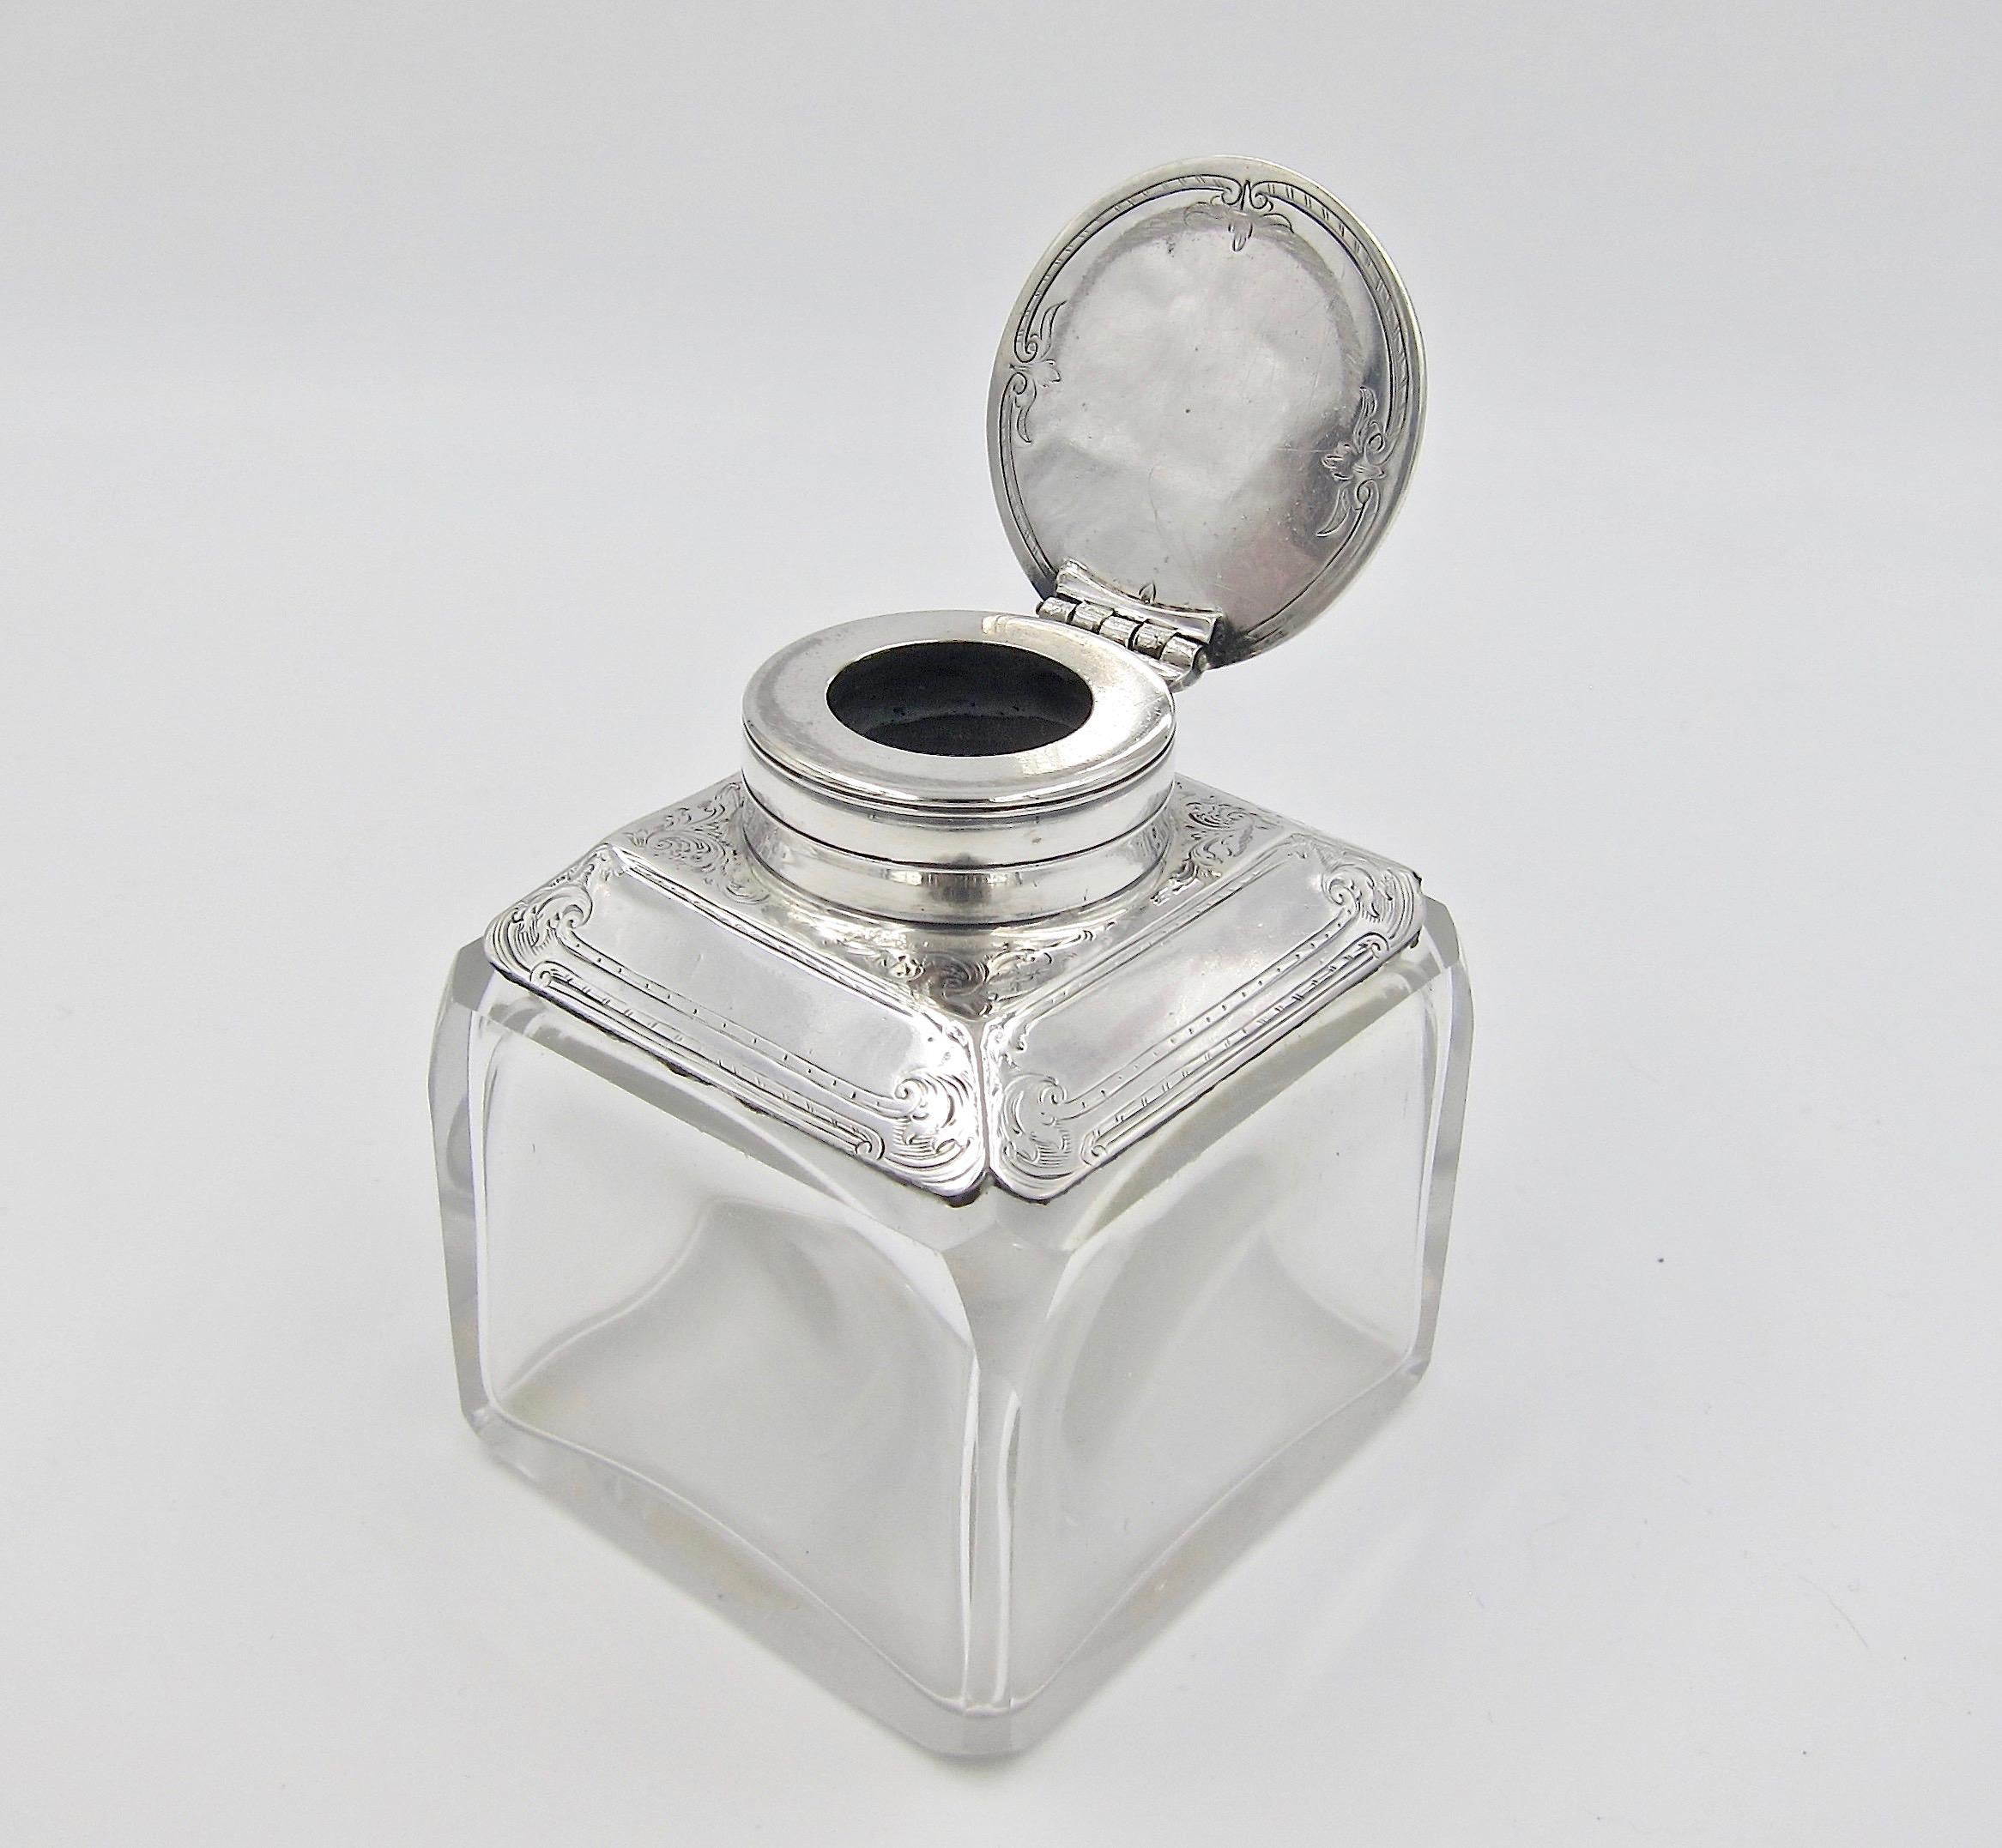 19th Century Antique Glass Inkwell with Sterling Silver Lid and Collar, 1894